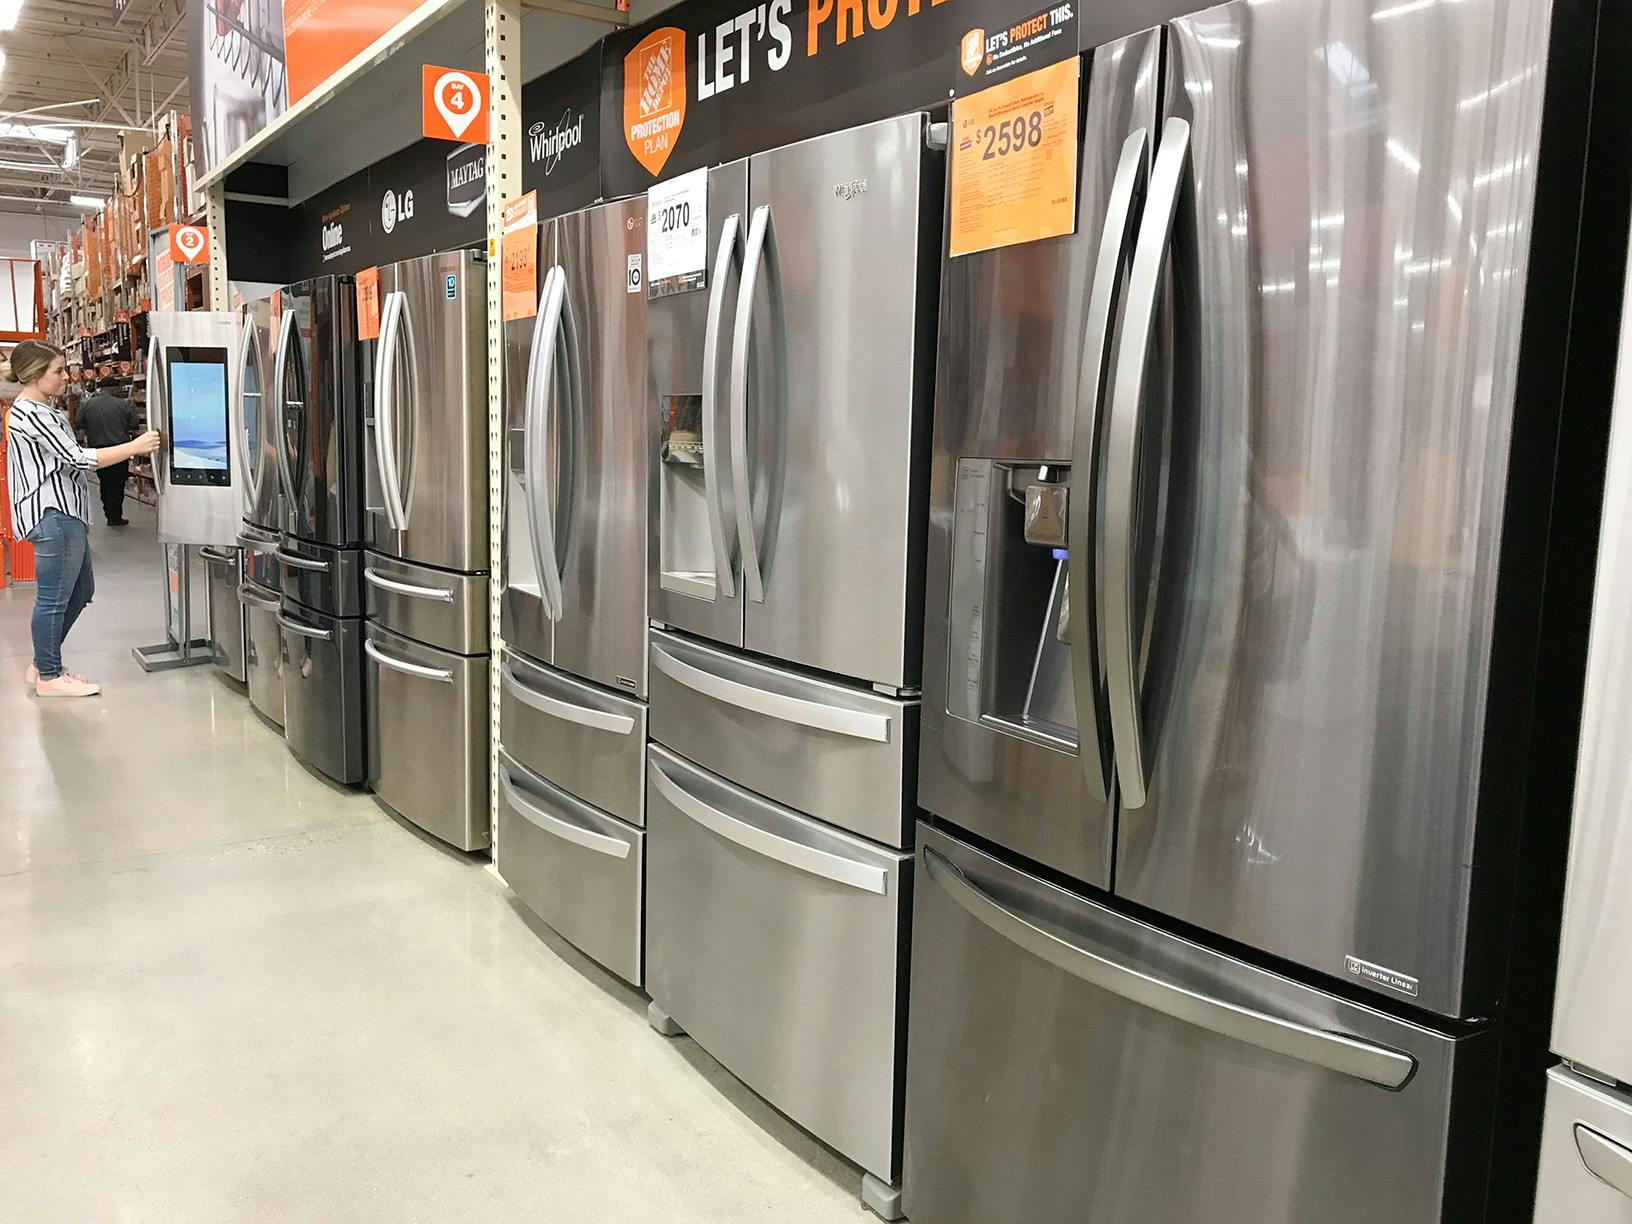 A row of refrigerators on display at Home Depot.